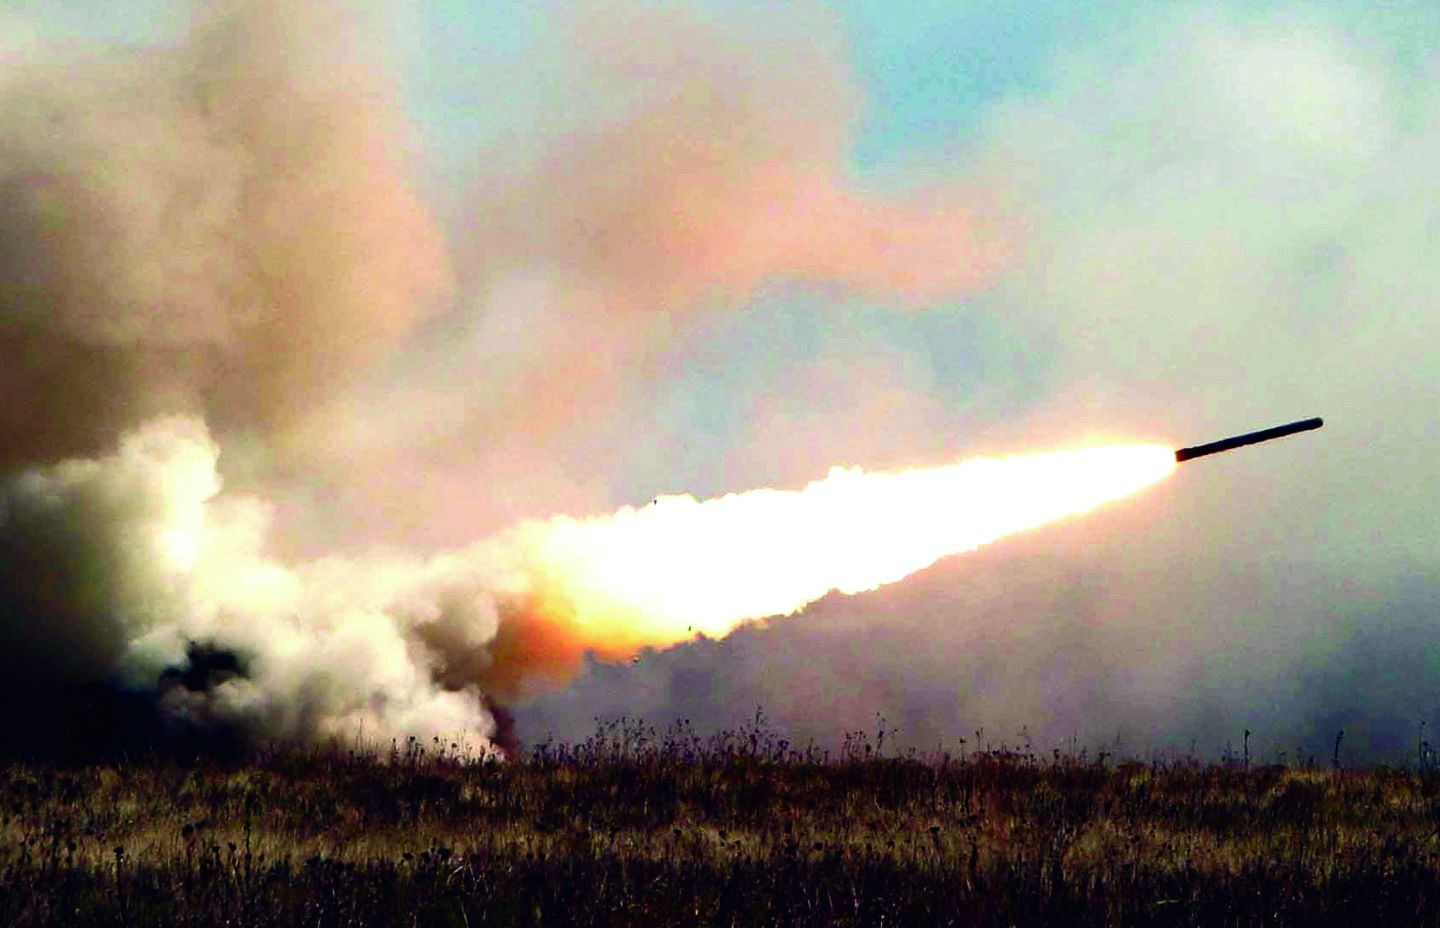 A High Mobility Artillery Rocket System fires a six-rocket volley of practice rounds at Fort Still, Oklahoma, in December 2003.